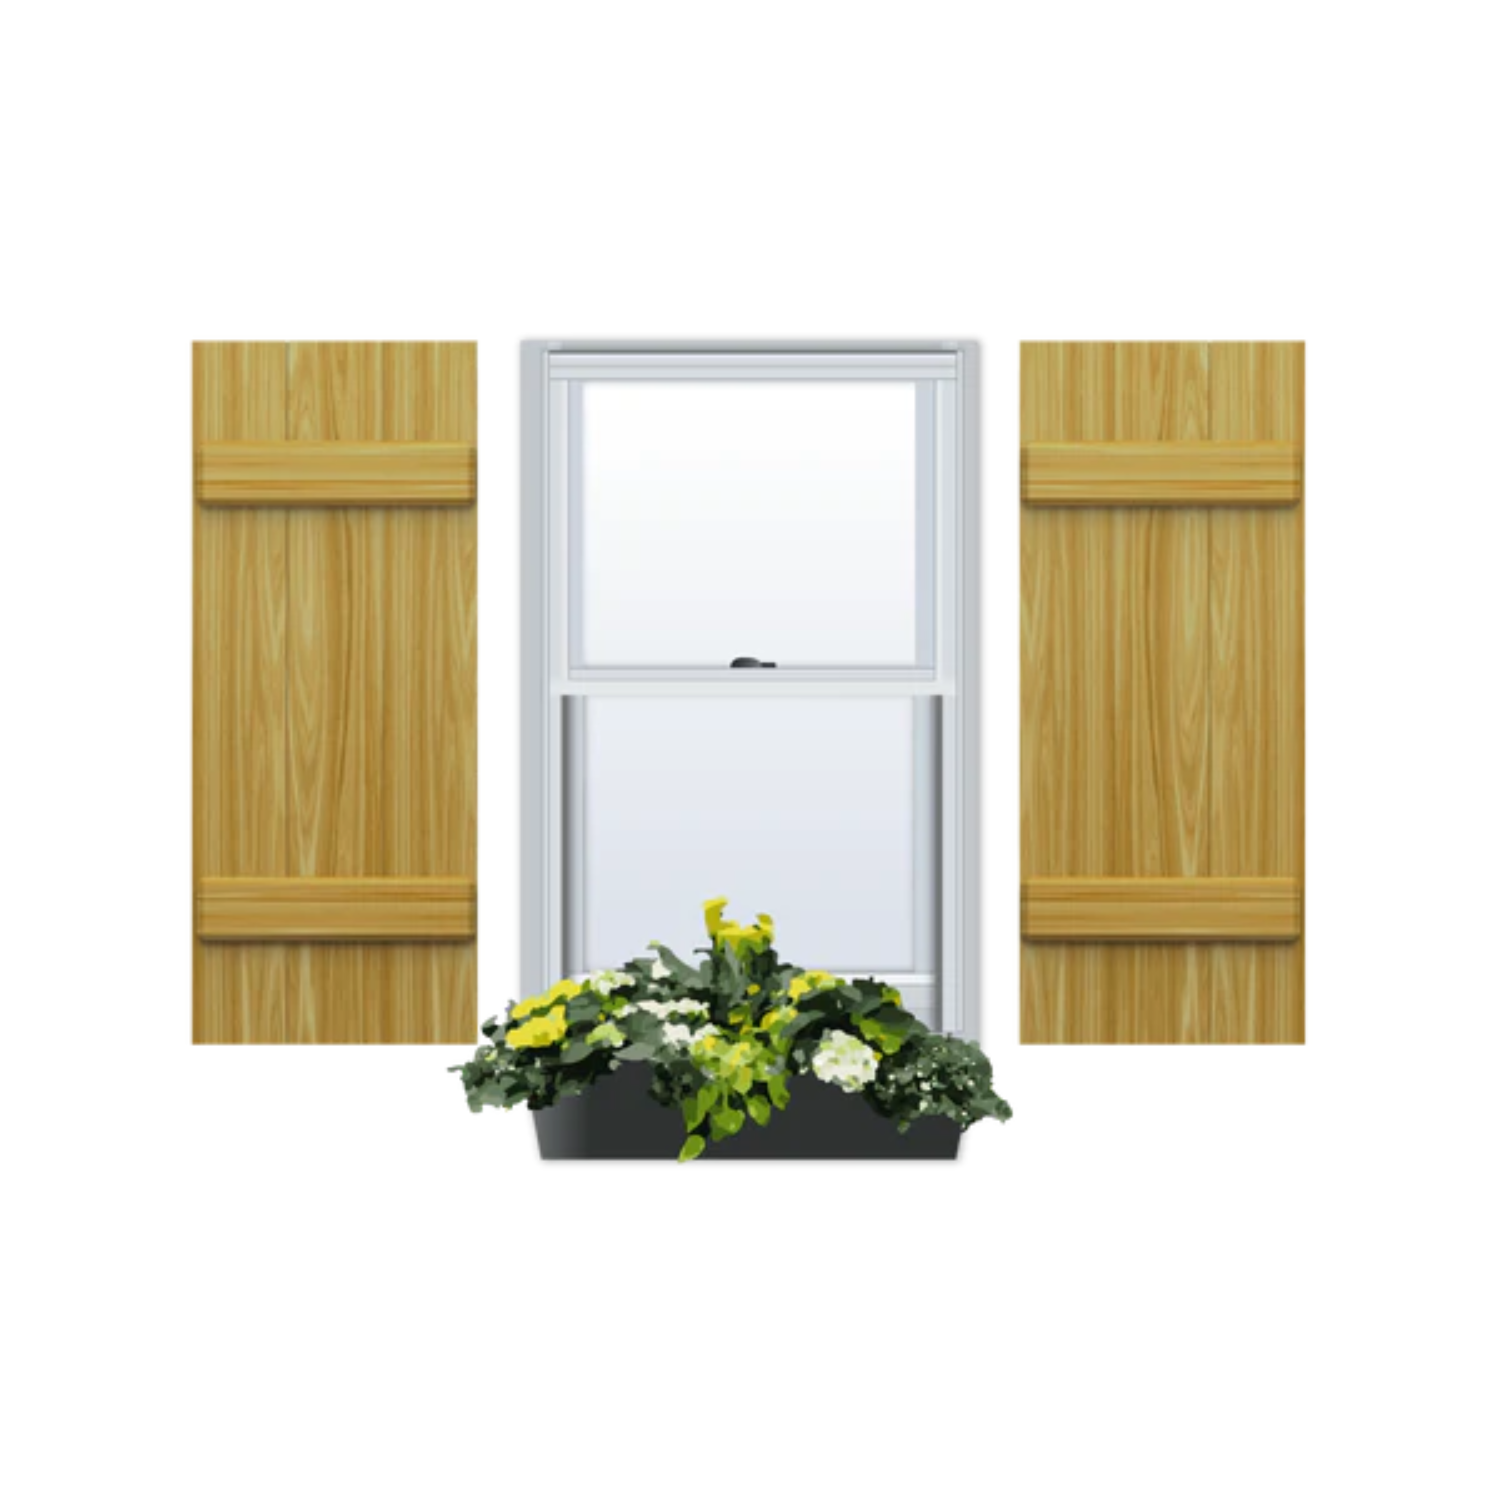 Pine | Joined Board and Batten Exterior Shutters | 3 Boards | 1 Pair